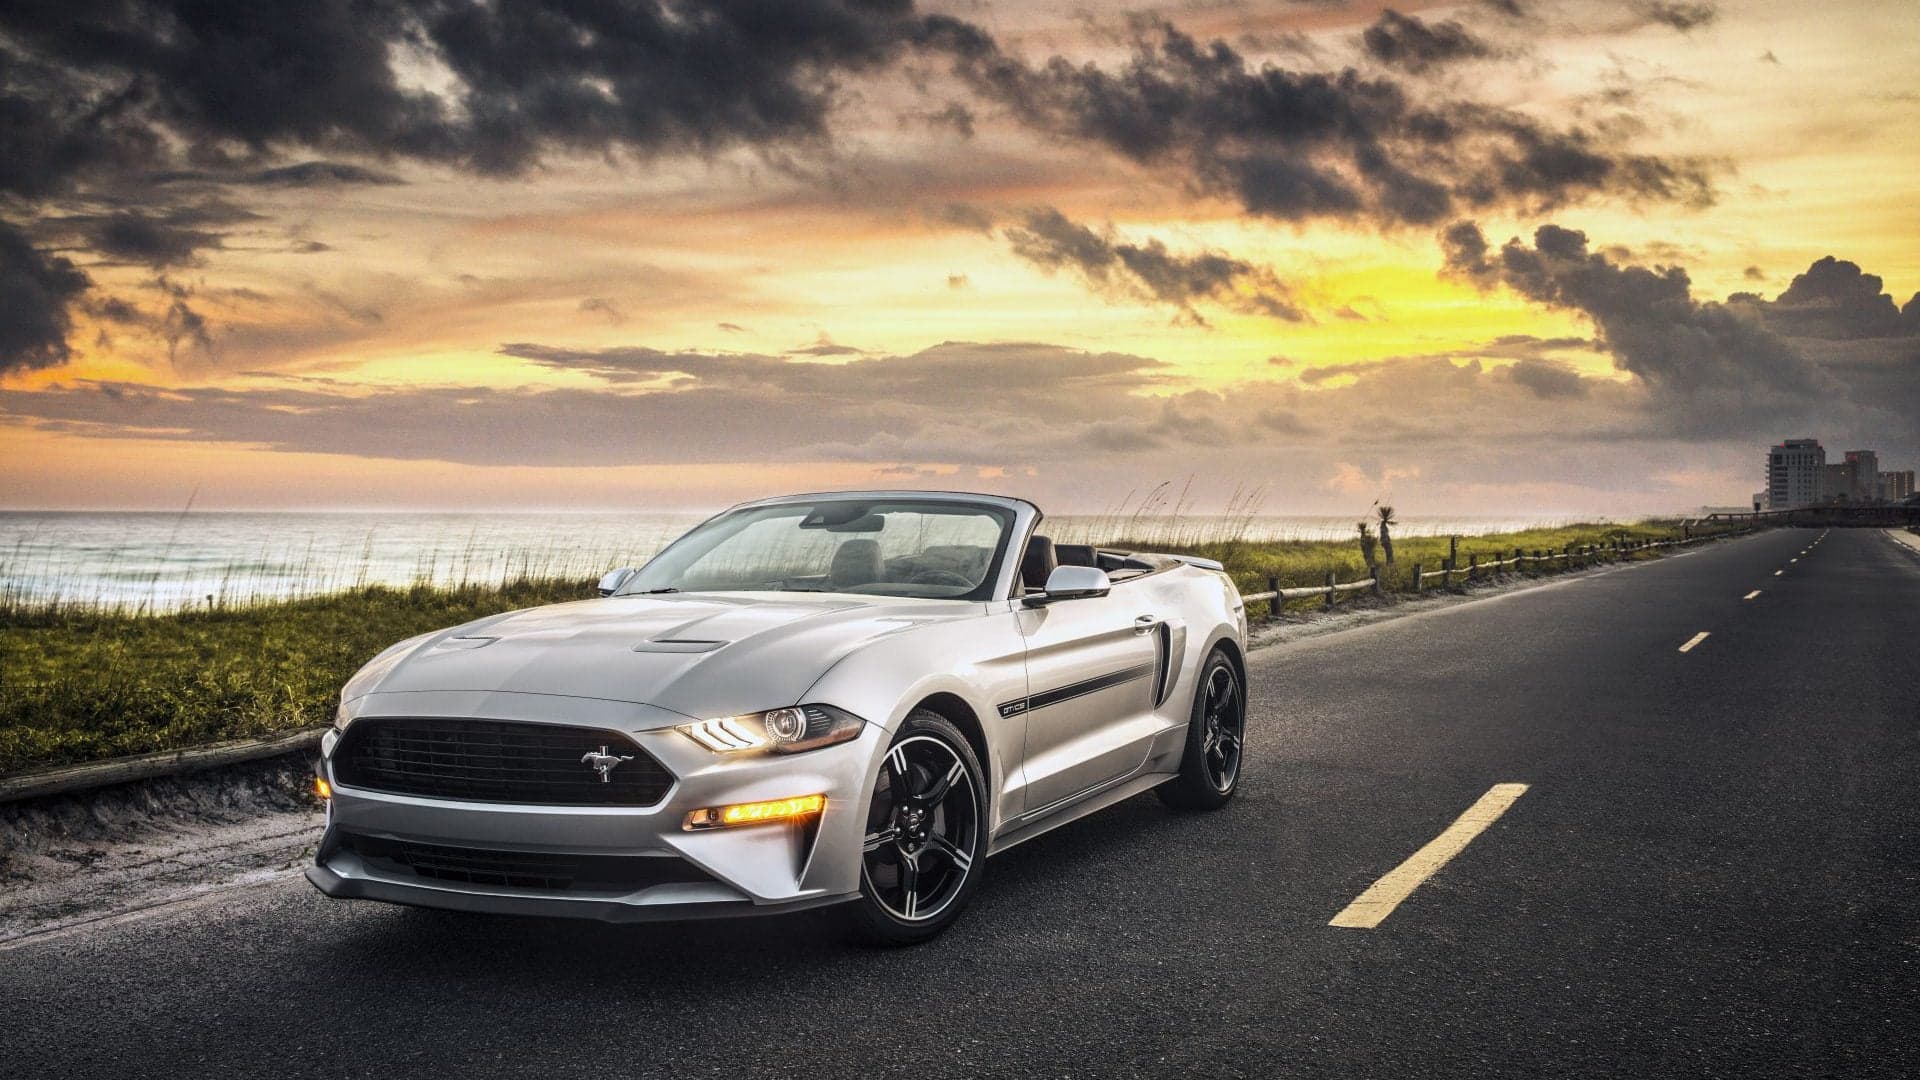 2019 Ford Mustang California Special Gets Updates Inside and Out